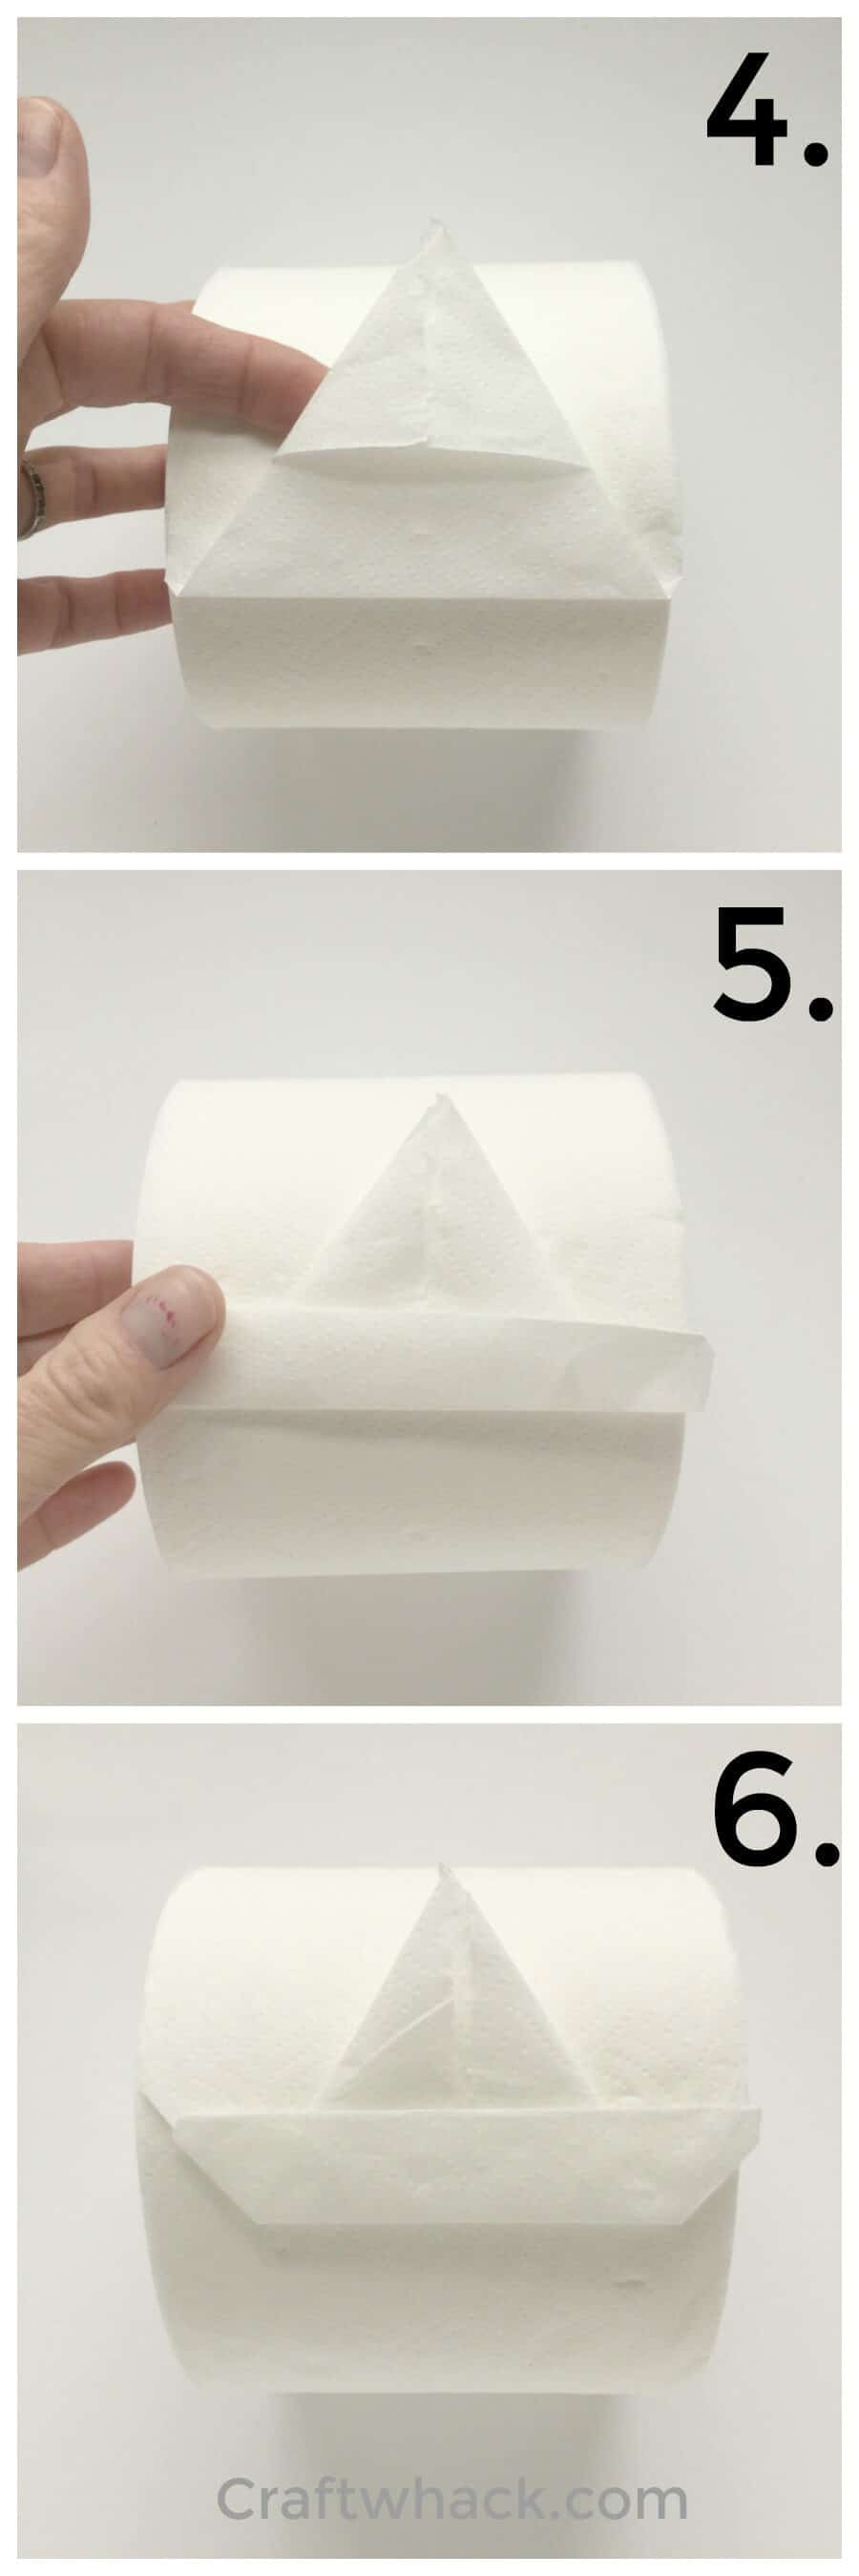 Toilet Paper Origami Ahoy Learn To Fold A Toilet Paper Origami Sailboat Craftwhack